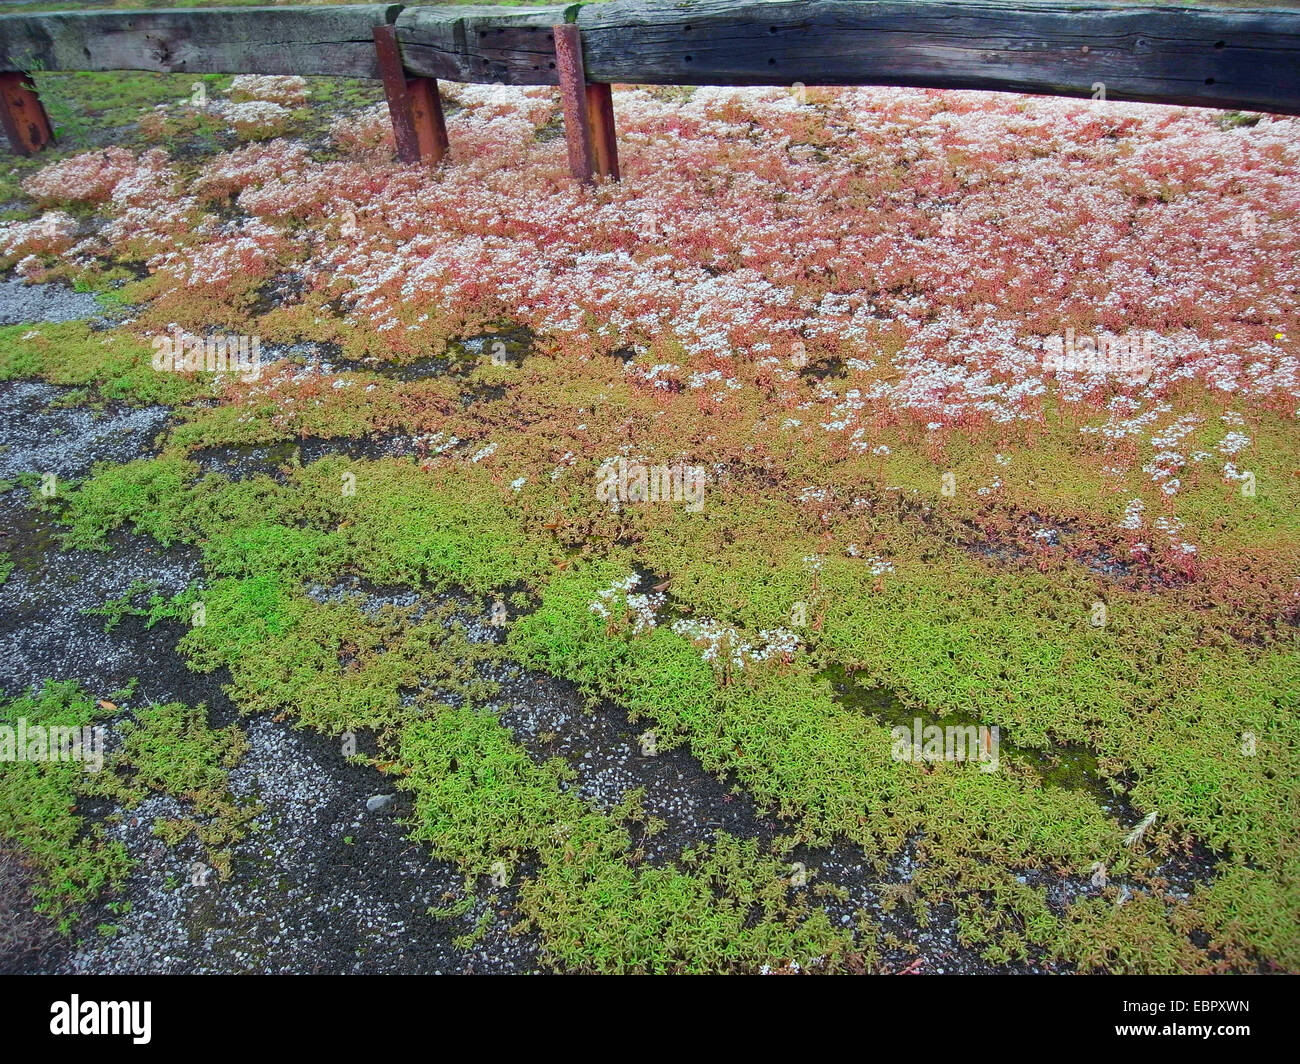 white stonecrop (Sedum album), blooming on a parking lot, Germany Stock Photo